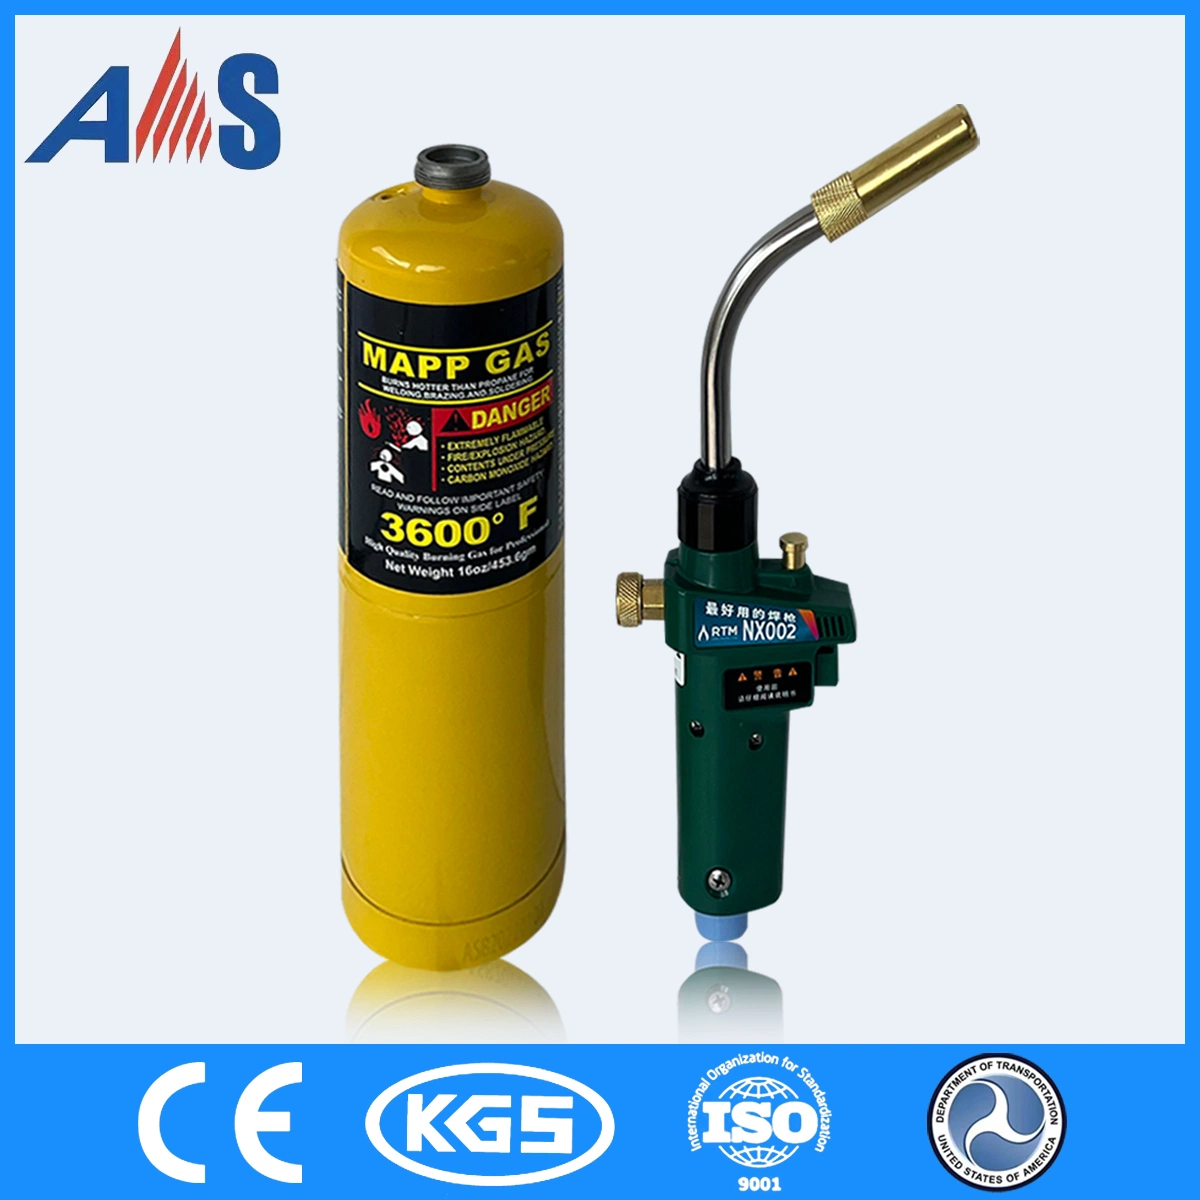 Mapp Gas Cylinder Welding Gas Mapp Torch Purity 99.99% From Ansheng Company